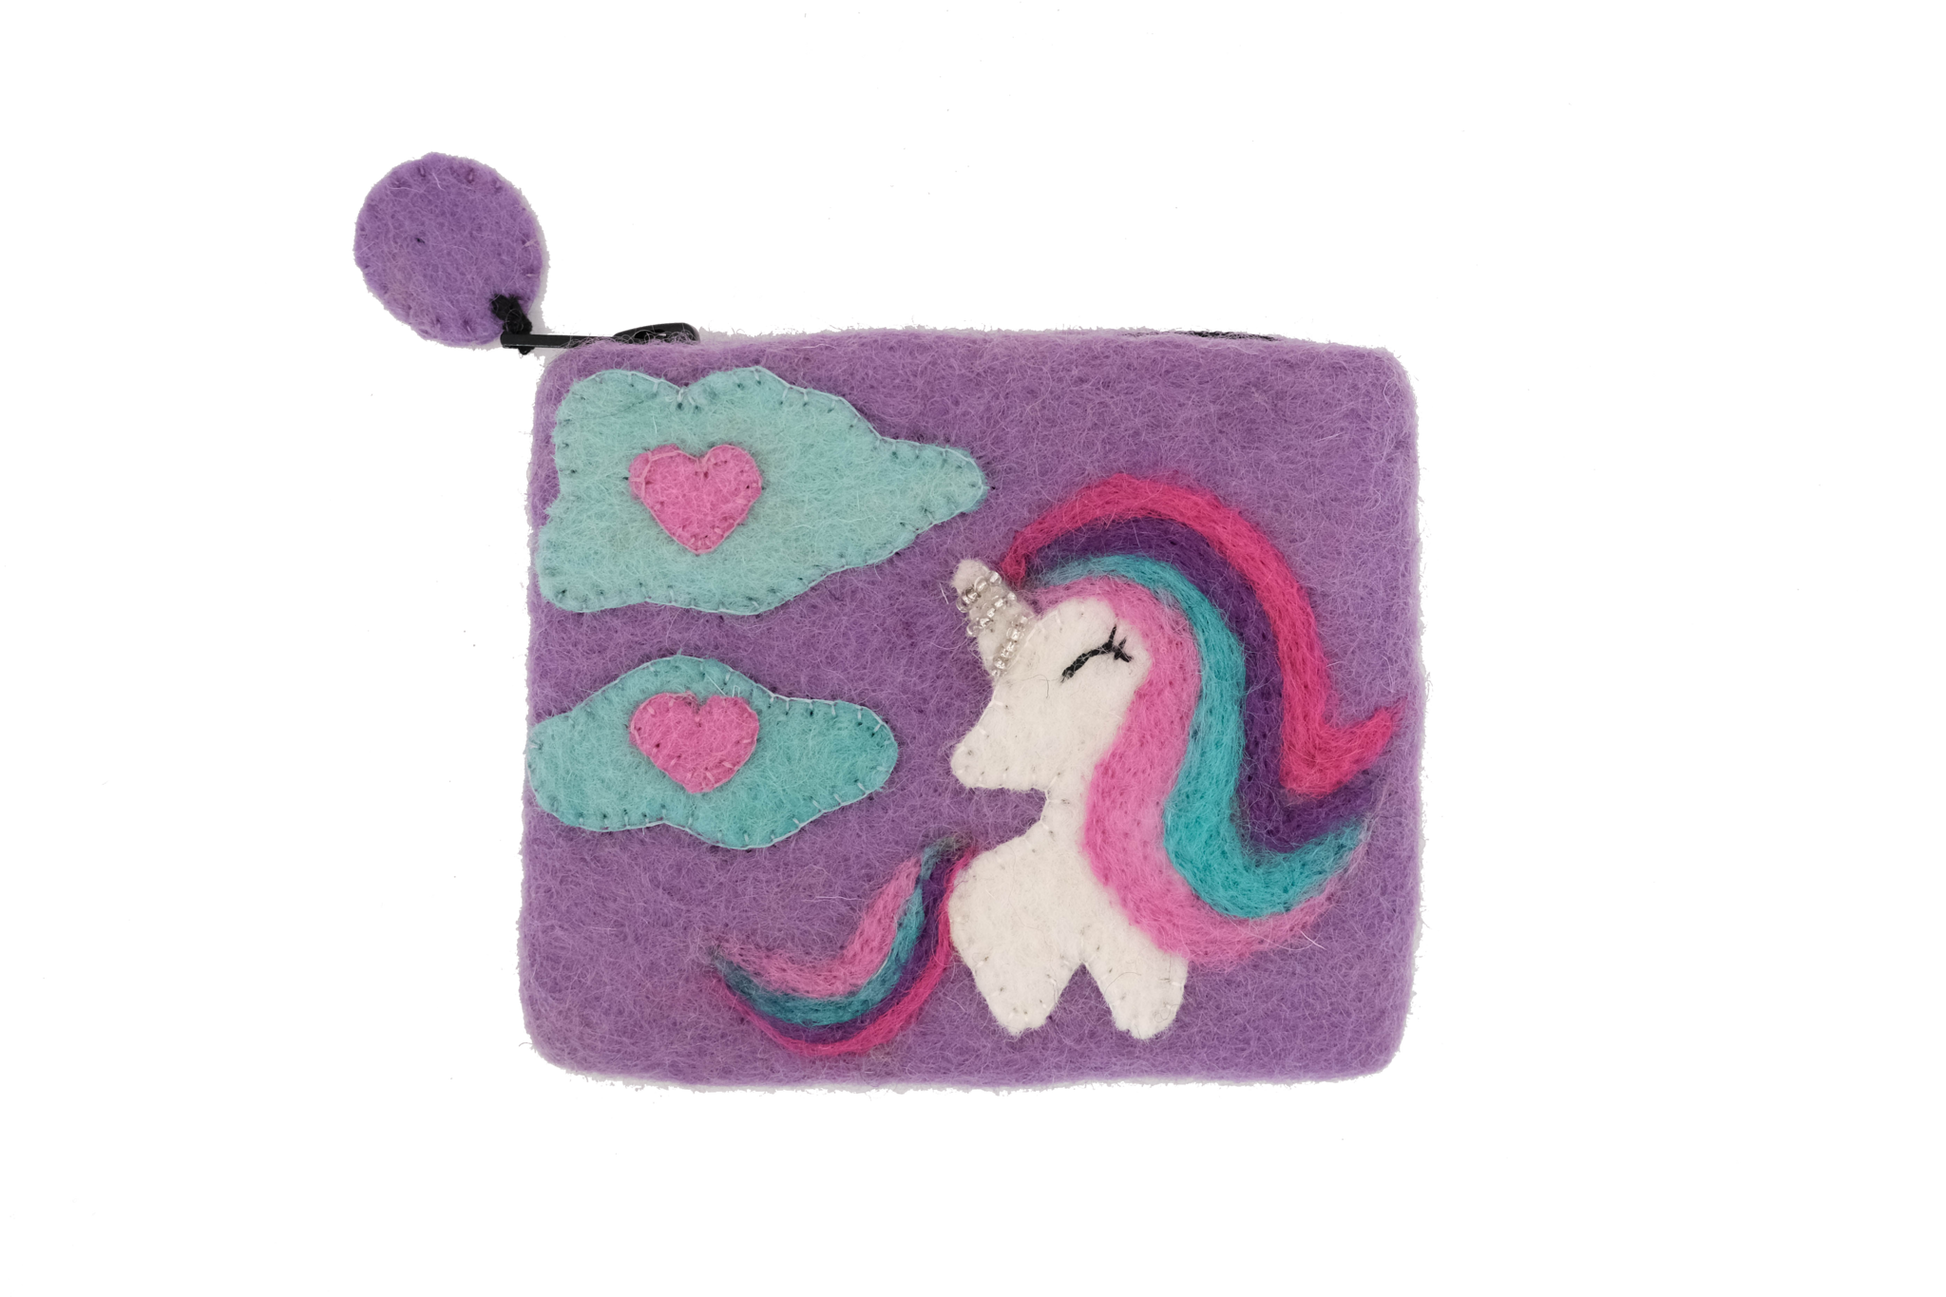 This Global Groove Life, handmade, ethical, fair trade, eco-friendly, sustainable, purple, felt zipper coin pouch was created by artisans in Kathmandu Nepal and is adorned with a Unicorn, hearts and clouds.